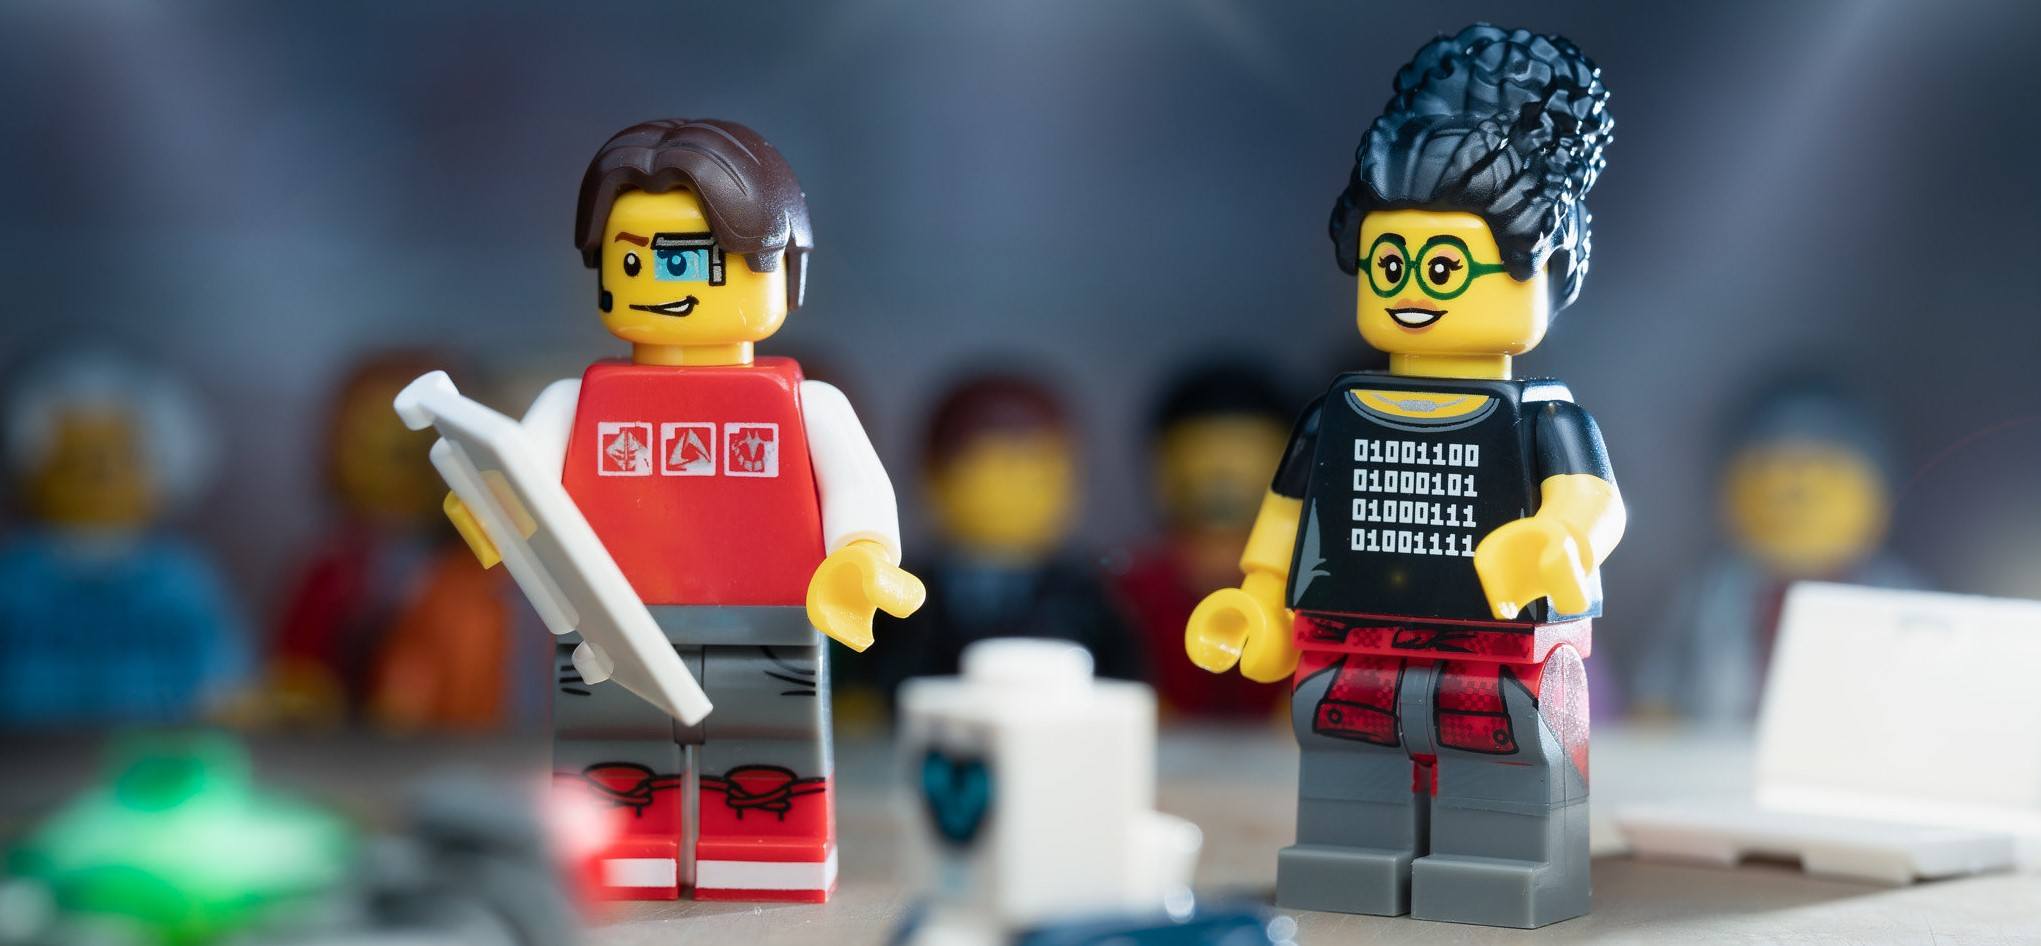 lego programmer - How to Stop Stress Eating (3 Strategies)